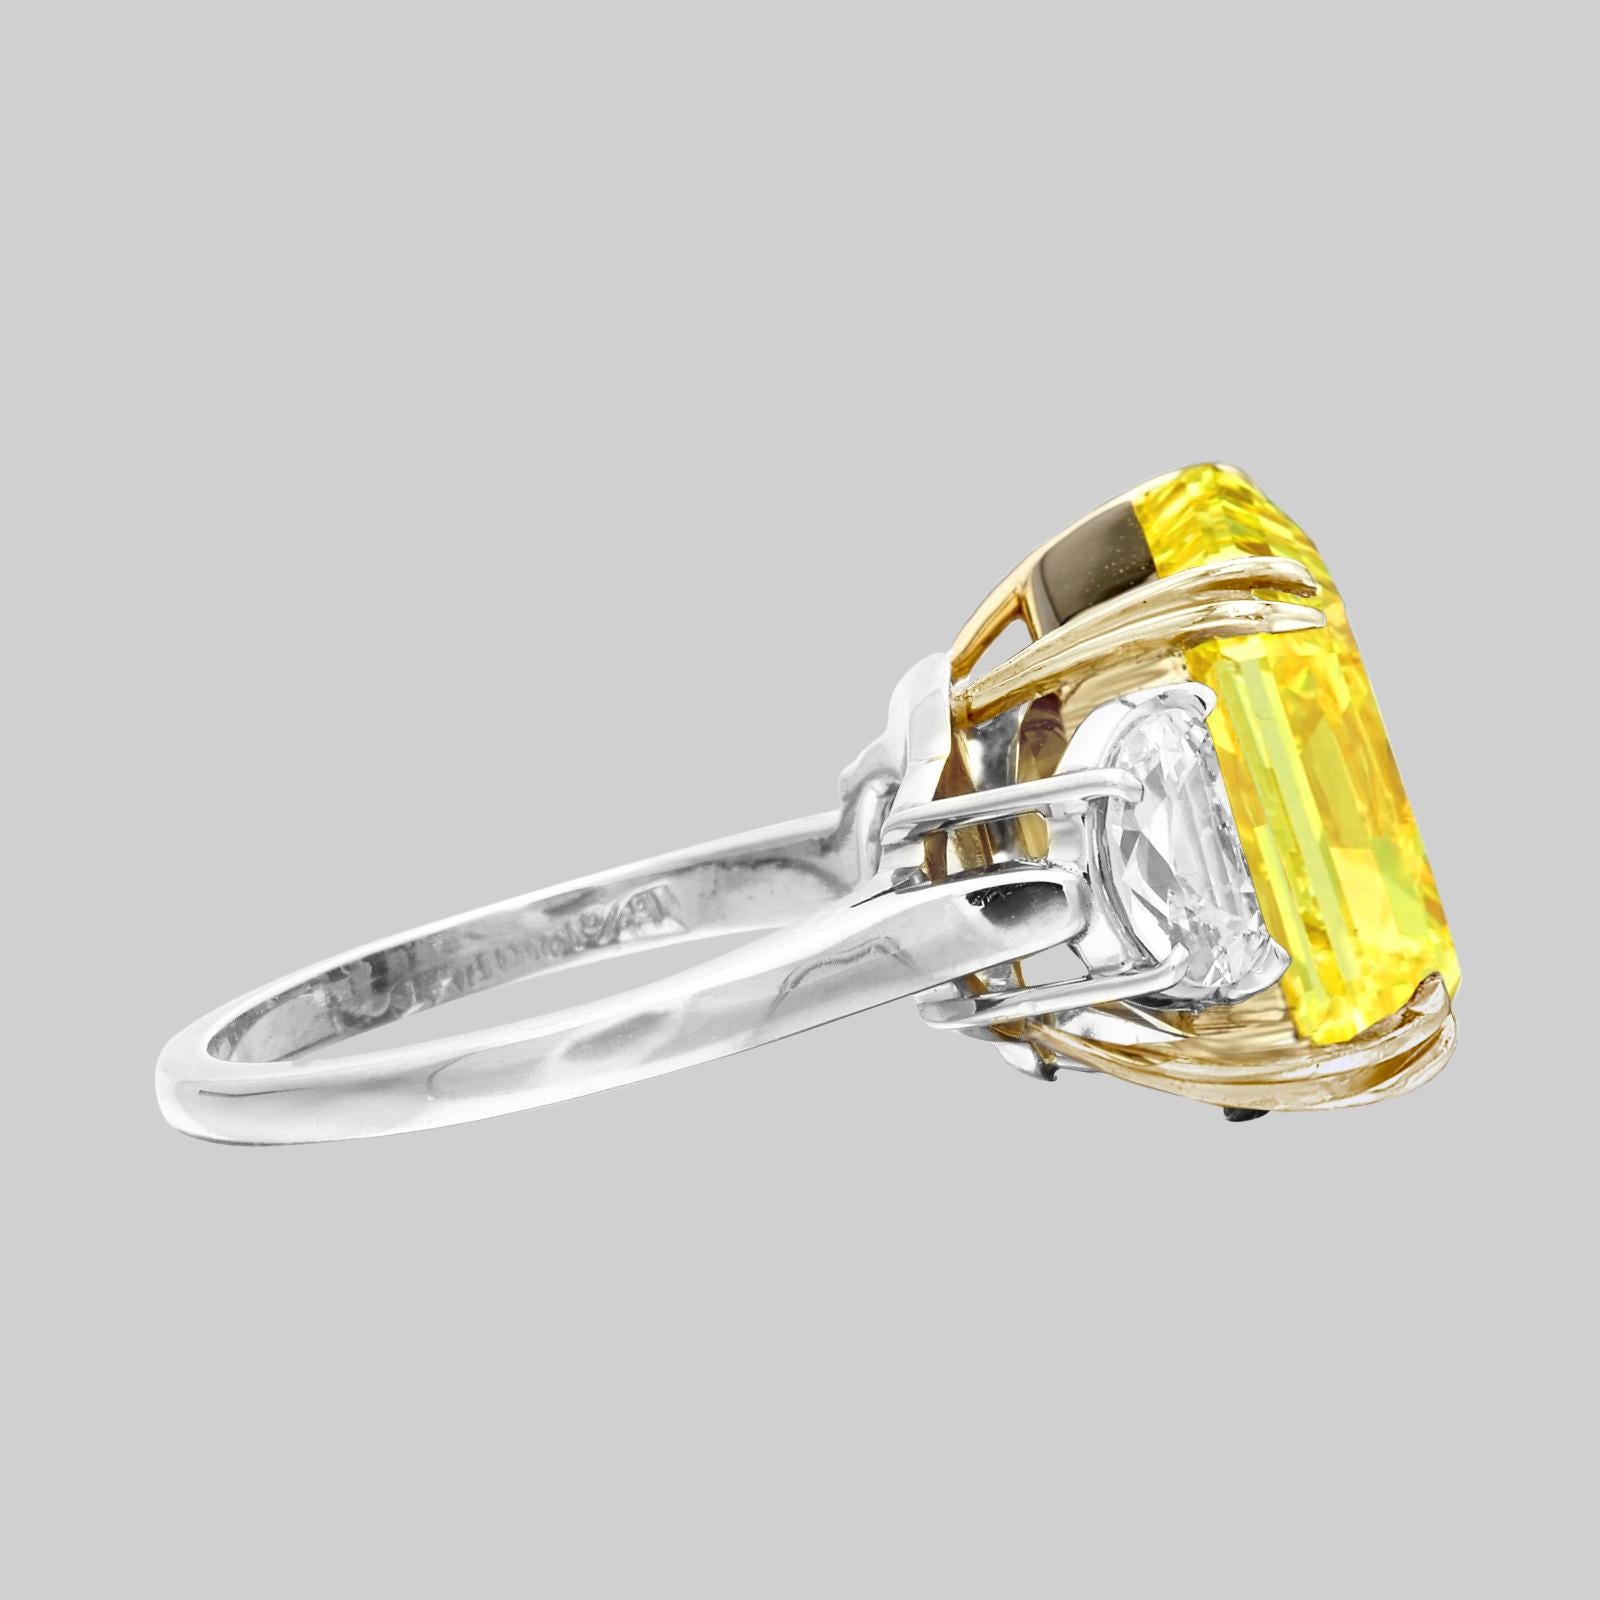 An important ring comprising of a radiant diamond weighing 4 carats. 
The diamond is certified by GIA stating that it's of fancy yellow color, VVS clarity.
It's accented by two half-moon diamonds on both sides weighing a total of 0.70 carats.
Metal: